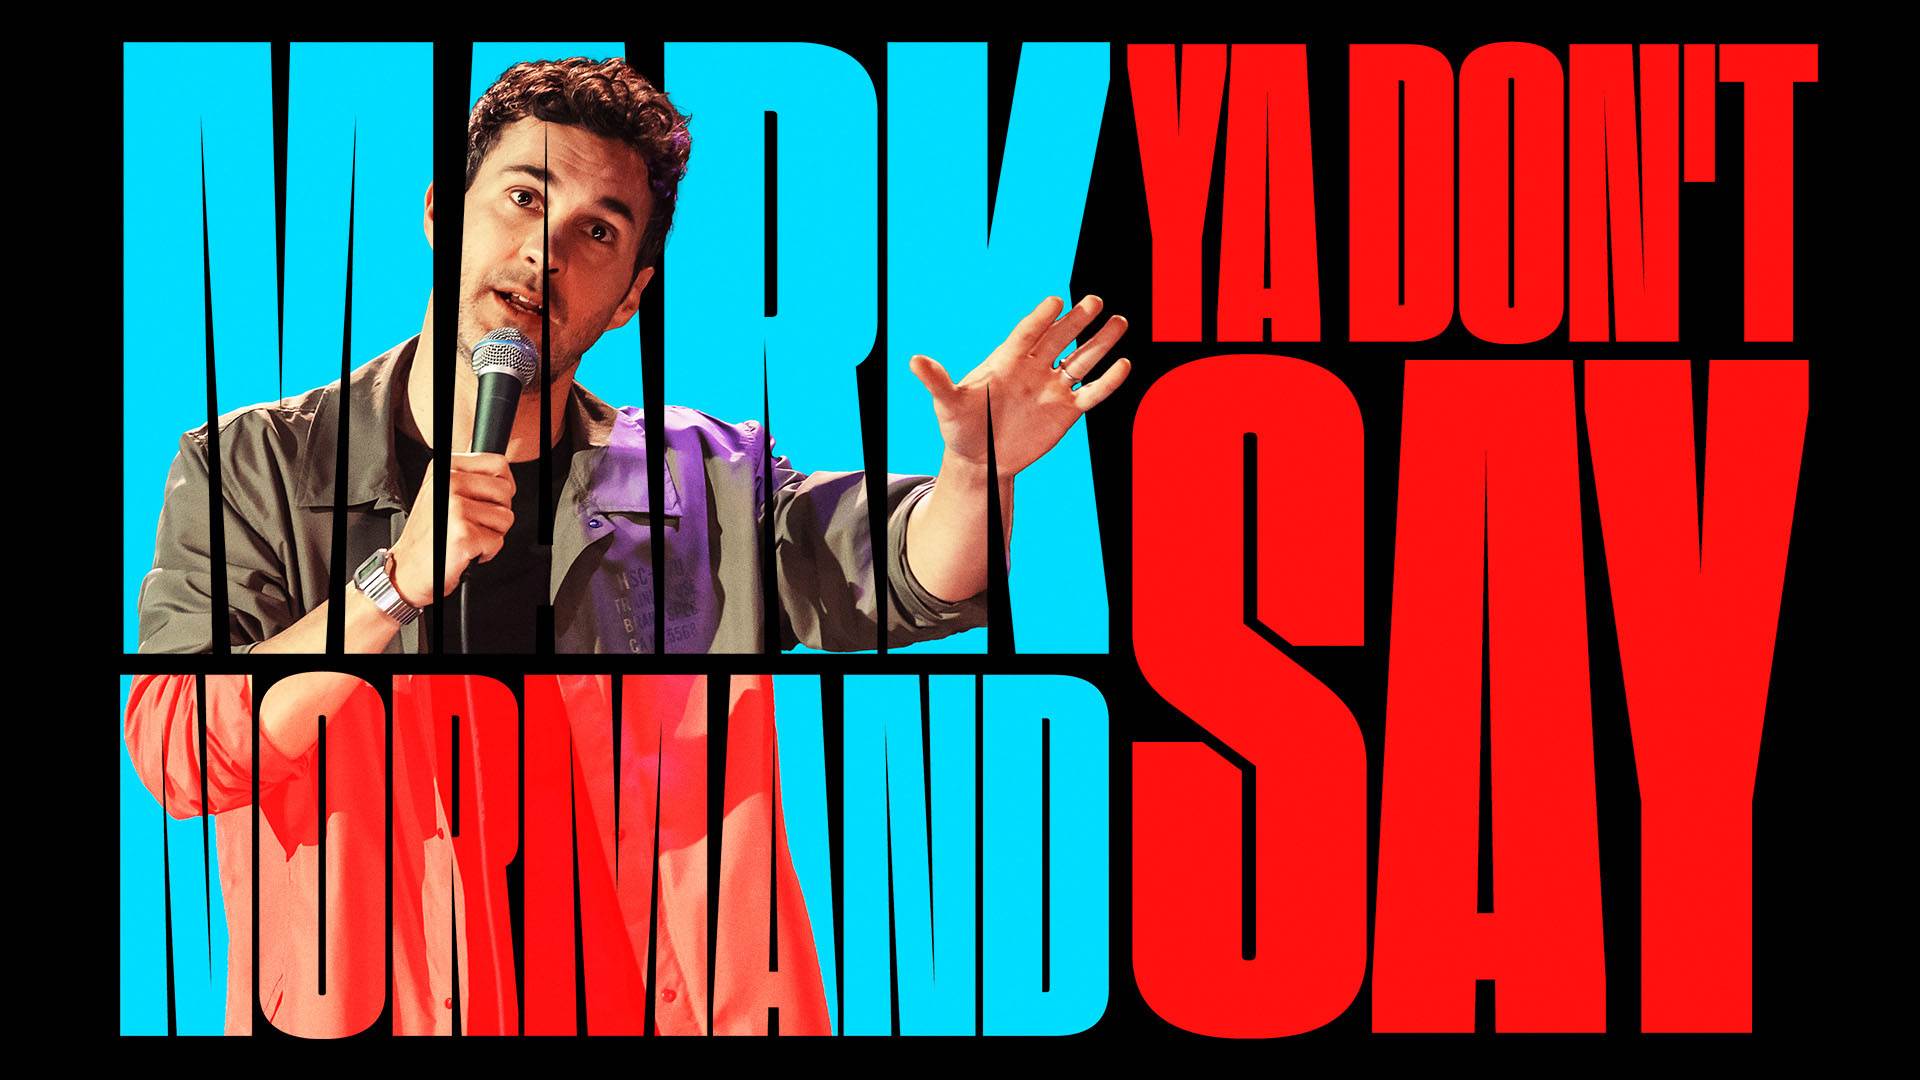 Banner text reads: "Mark Normand Ya Don't Say". A young caucasian man with short brown hair in a tan shirt is speaking into a microphone with his hand outstretched. The lettering is large and in blue and red colors.